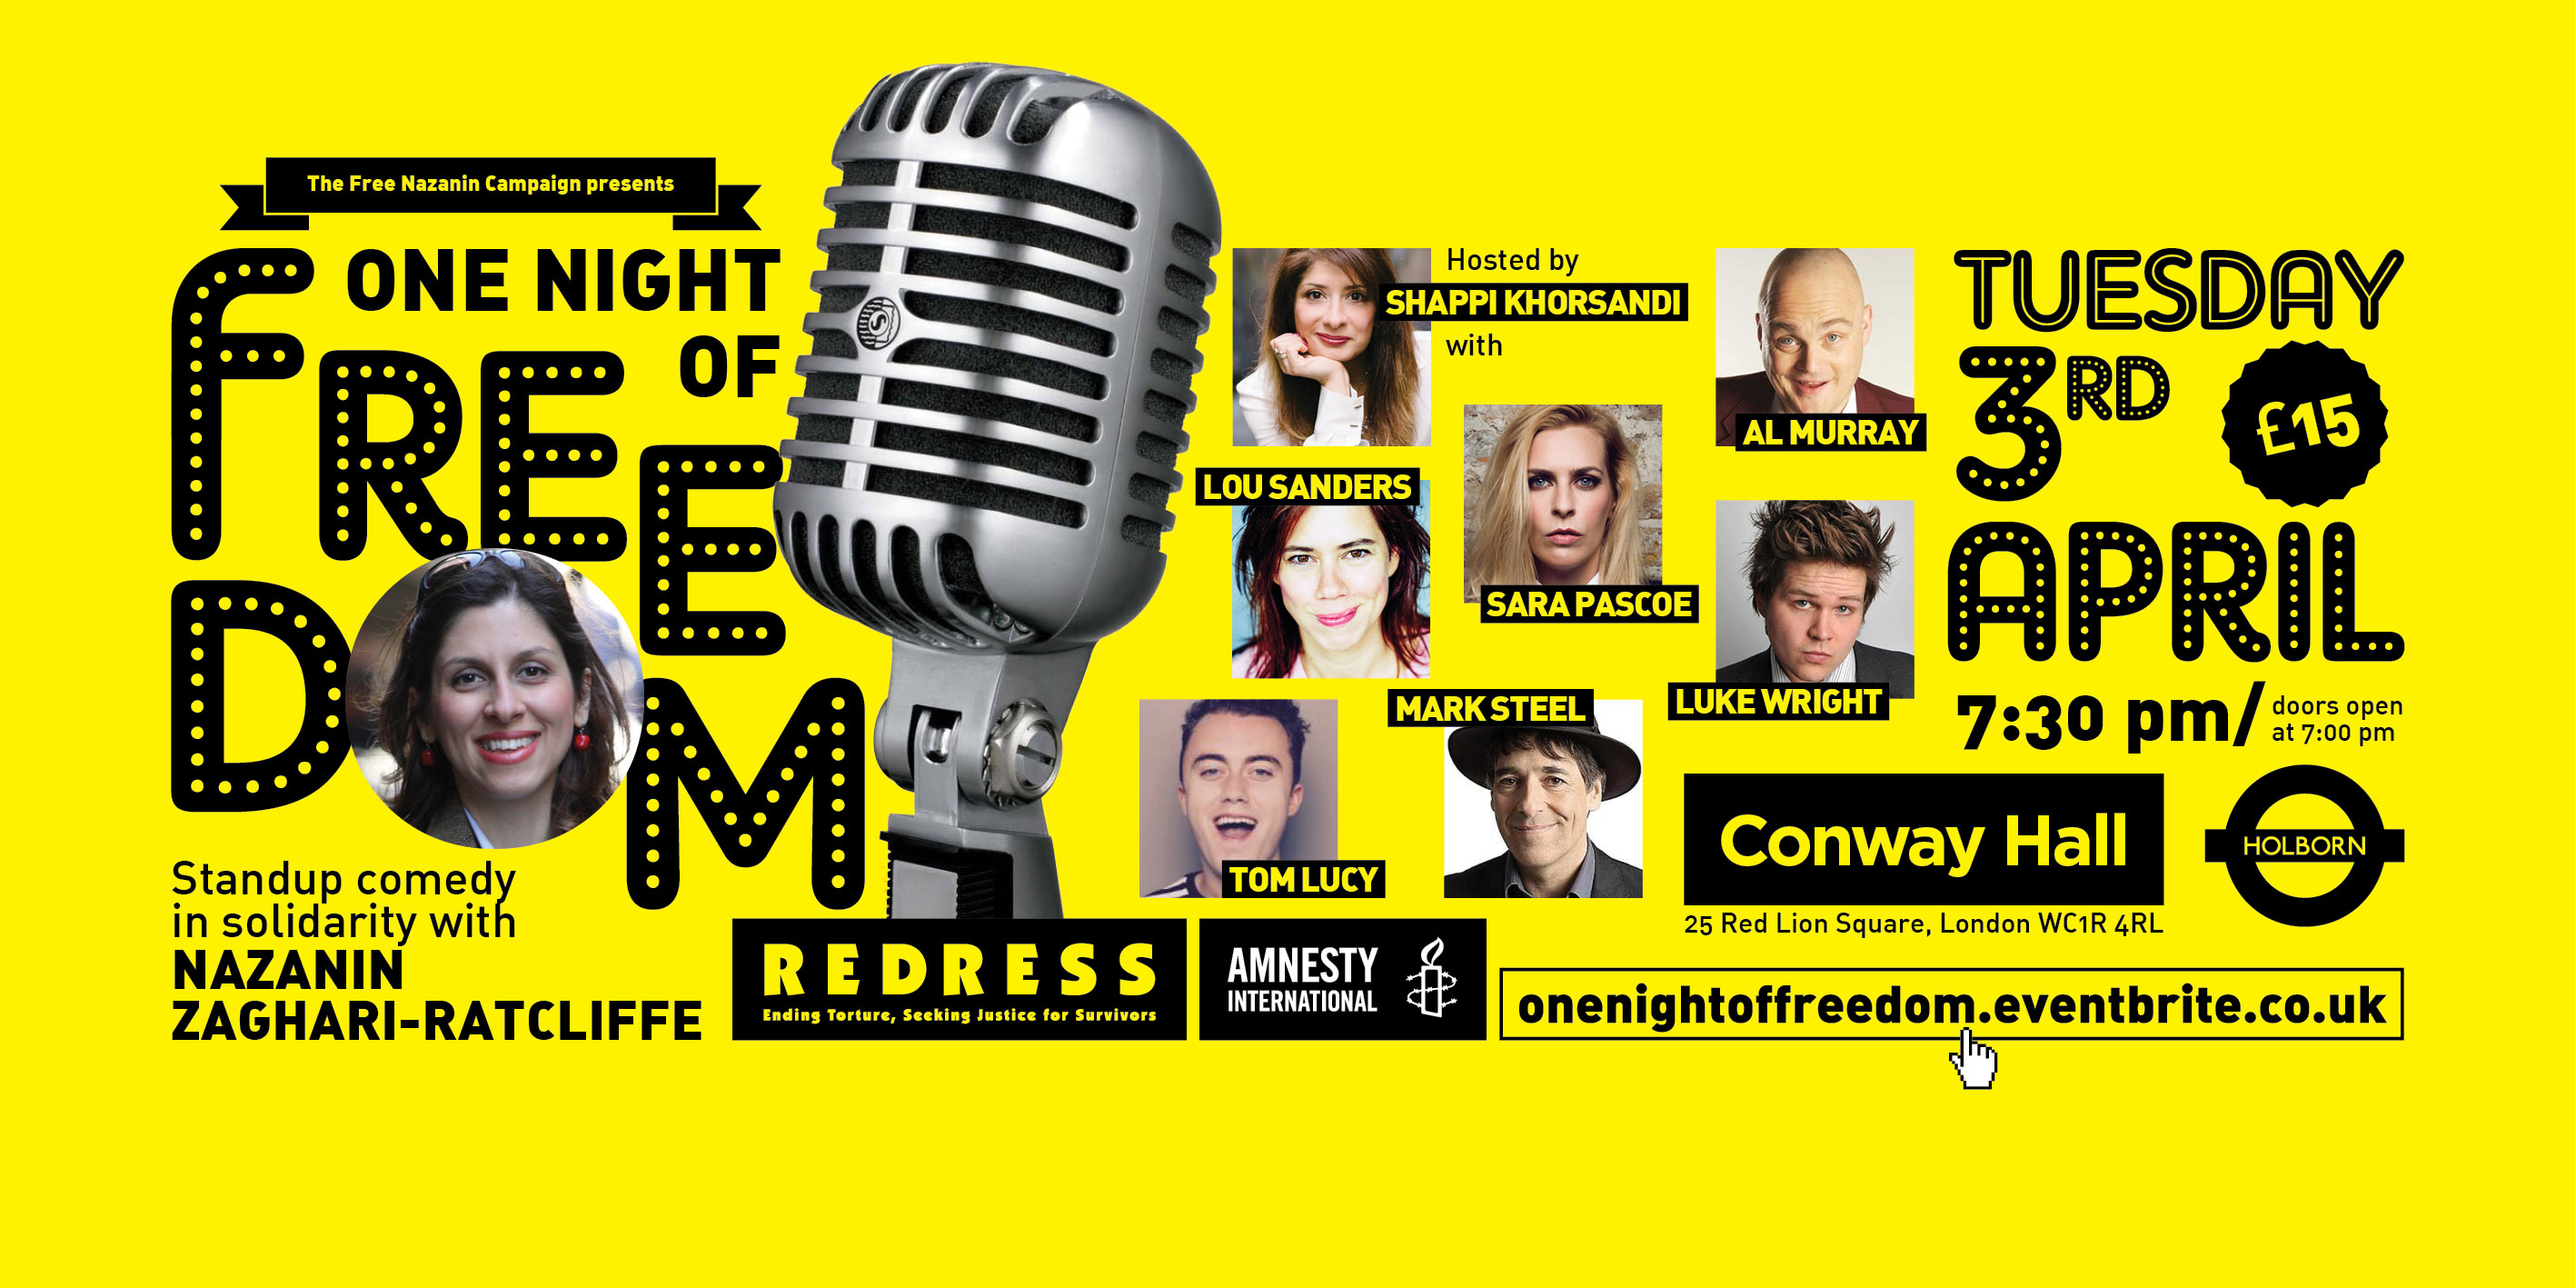 One Night of Freedom: comedy event in solidarity with Nazanin Zaghari-Ratcliffe